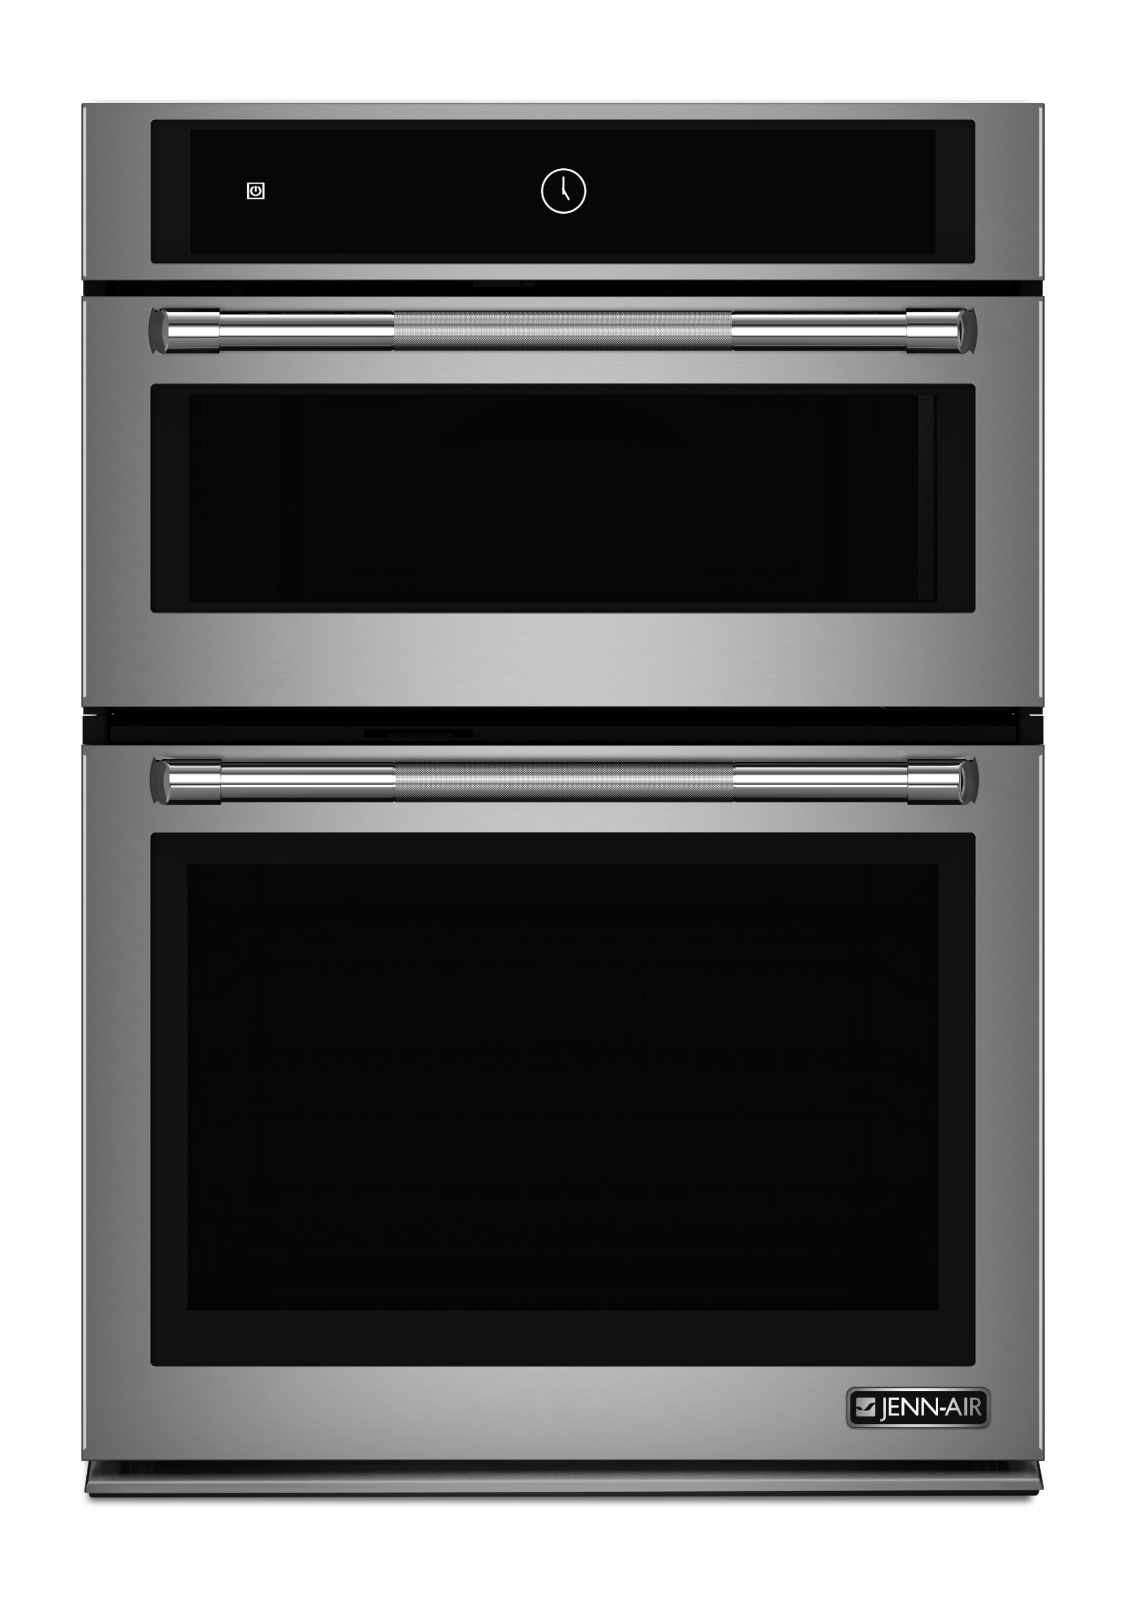 JennAir - 6.4 cu. ft Combination Wall Oven in Stainless - JMW2430DP